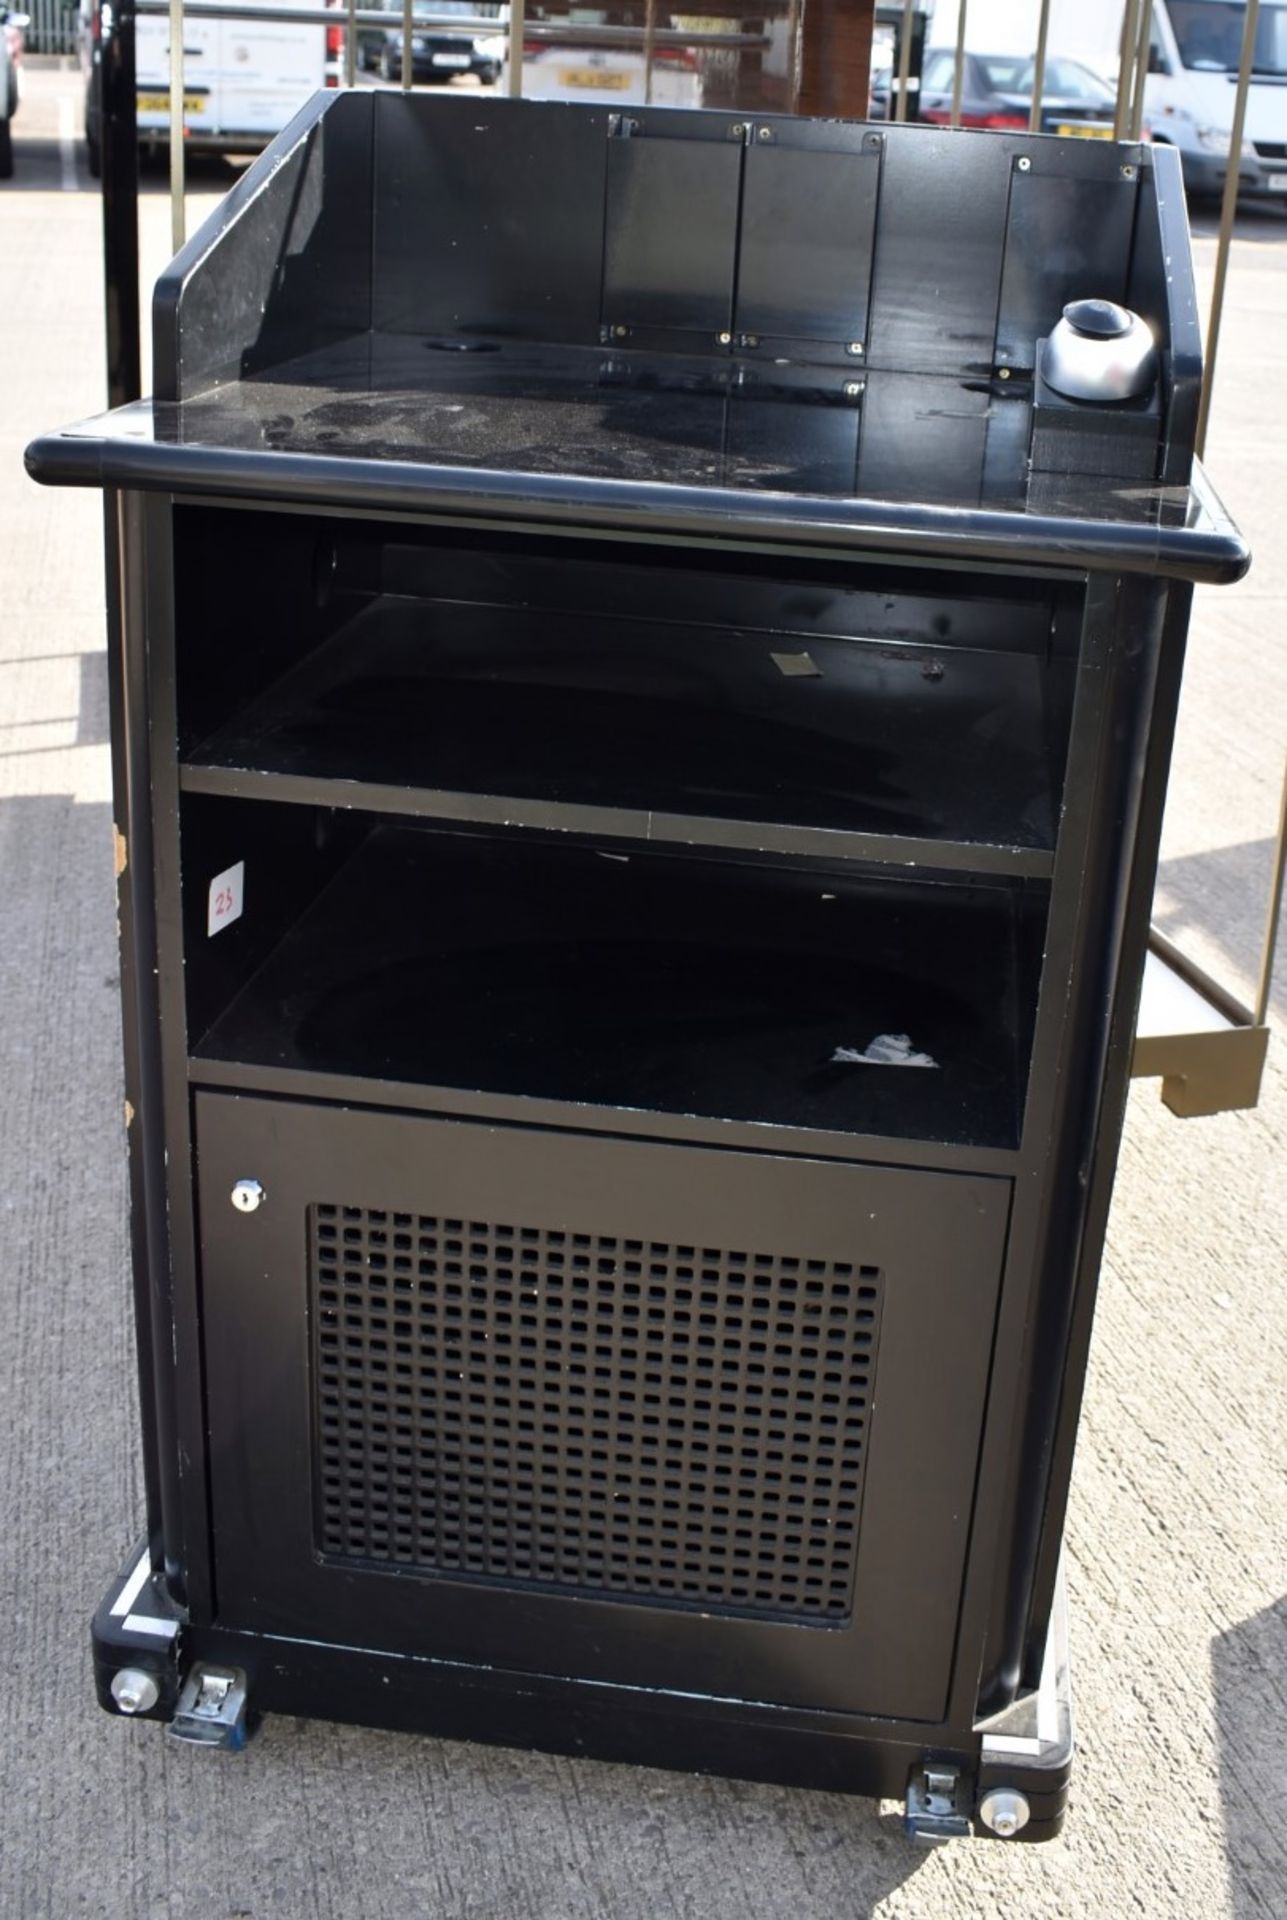 1 x Portable Mobile Sale Till Store Retail Counter Unit In Black, With Fold-out Sides - Image 4 of 4